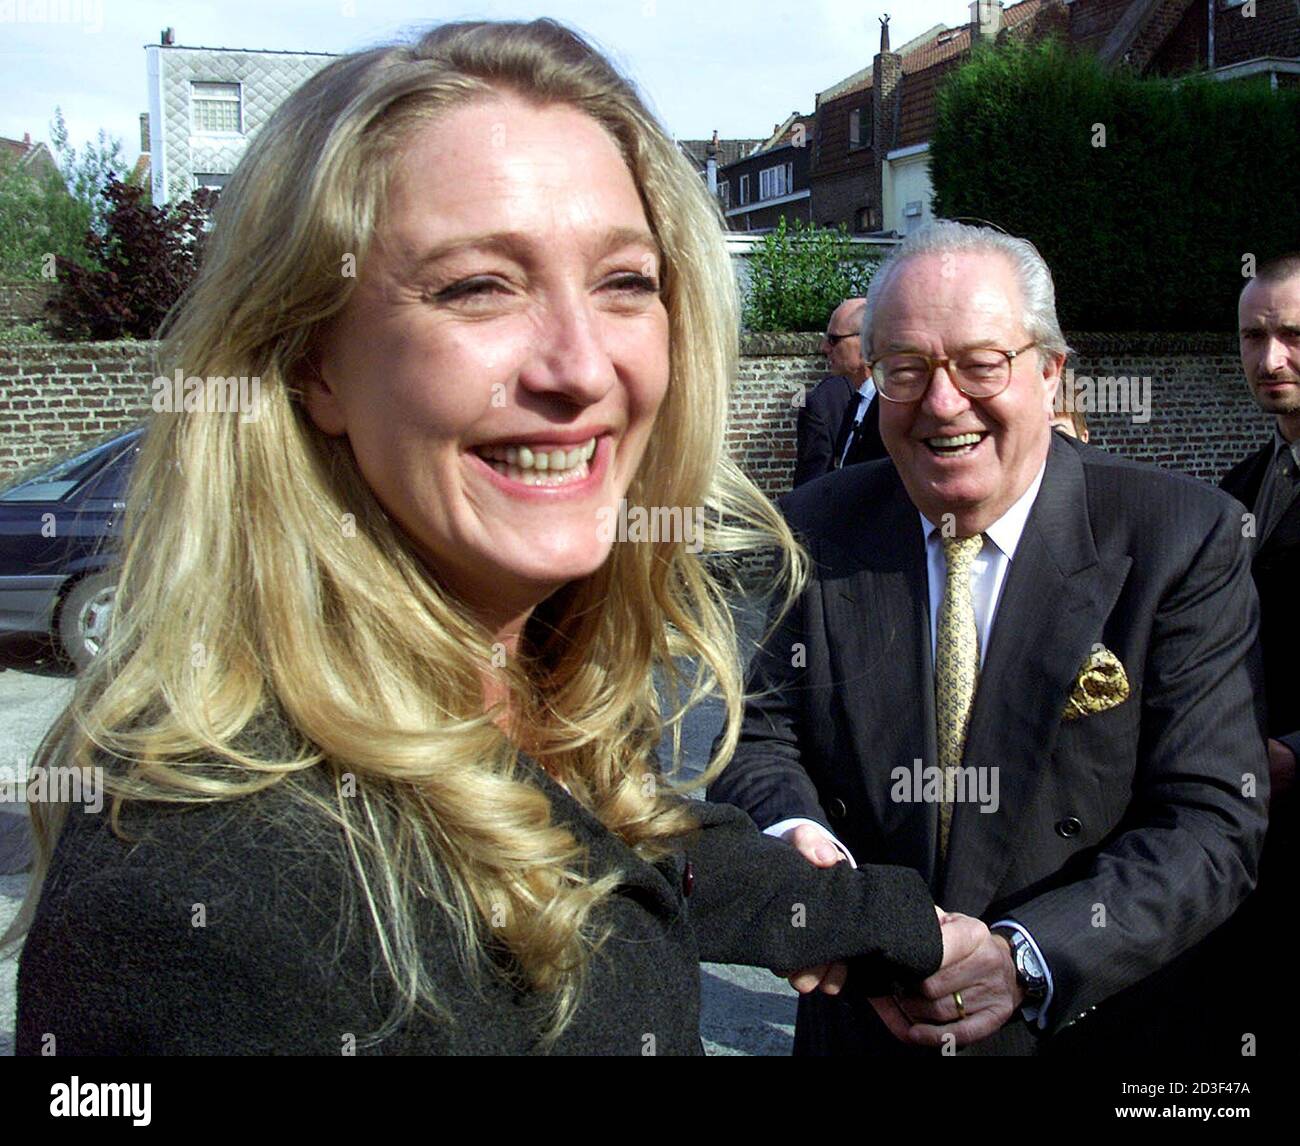 French National Front leader Jean Marie Le Pen (R) says goodbye to his  daughter Marine after a conference in Lomme, Northern France May 30, 2002. Marine  Le Pen is candidate in the